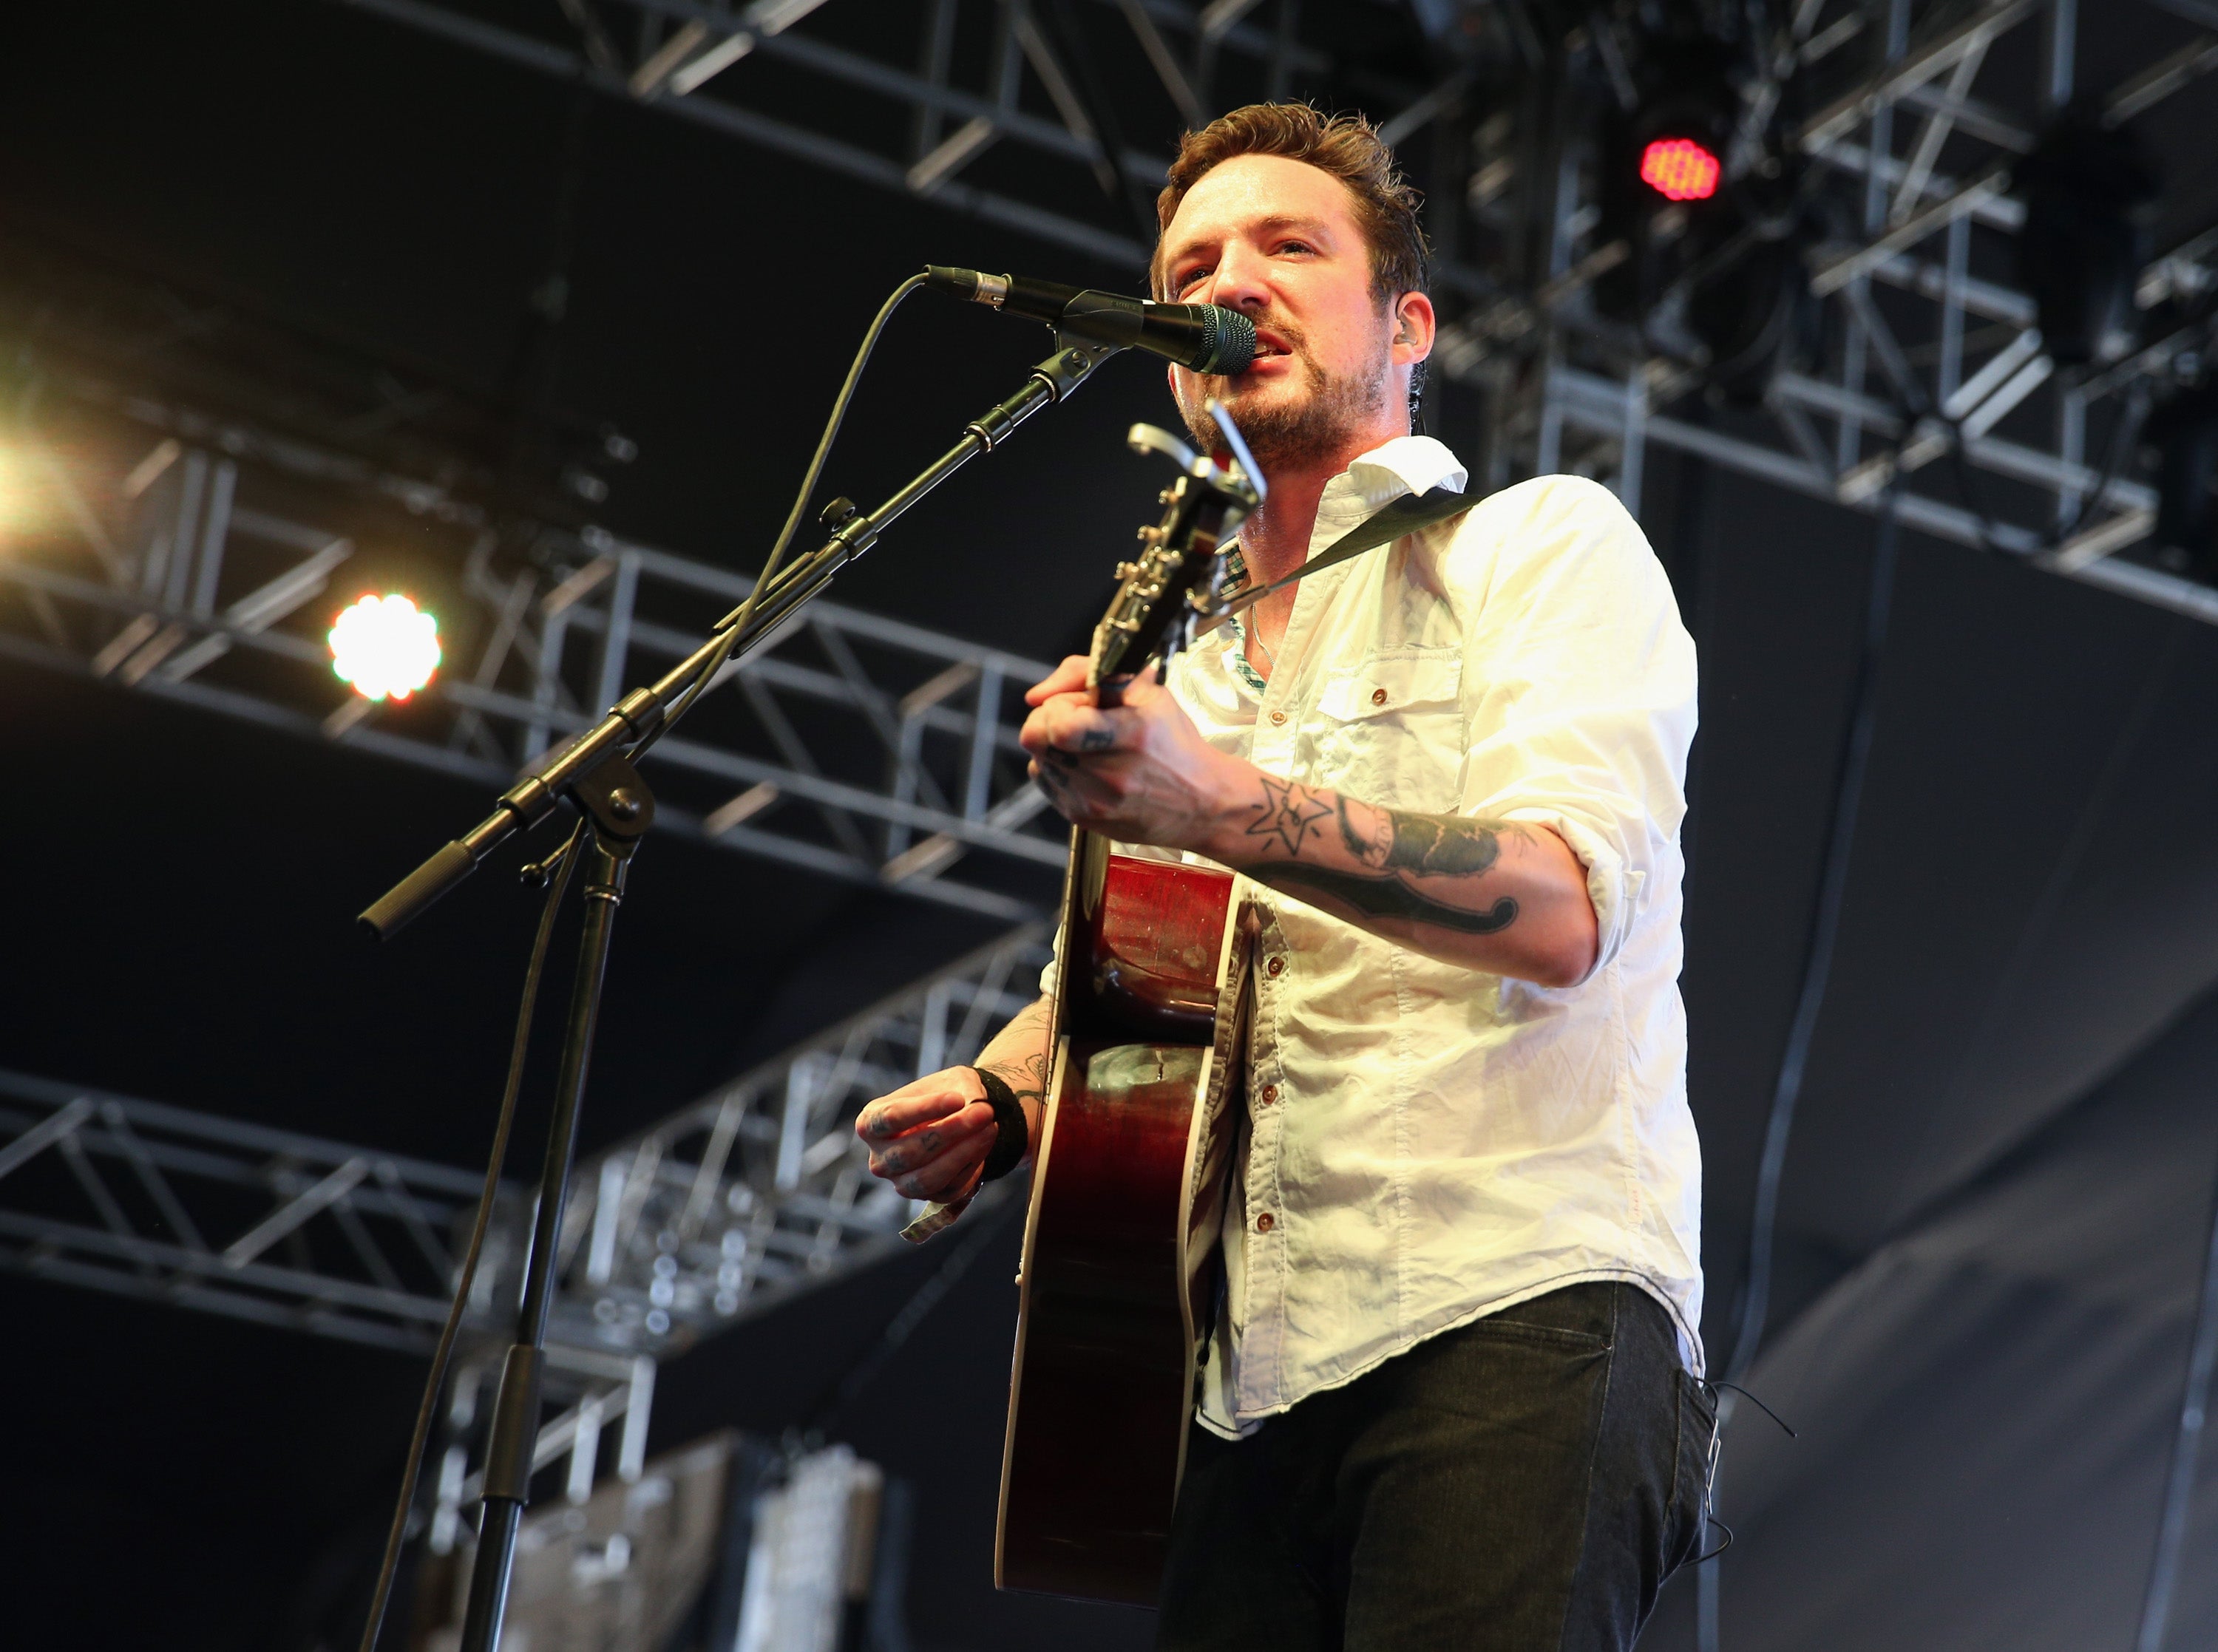 Frank Turner said the world record attempt was ‘on brand’ for him